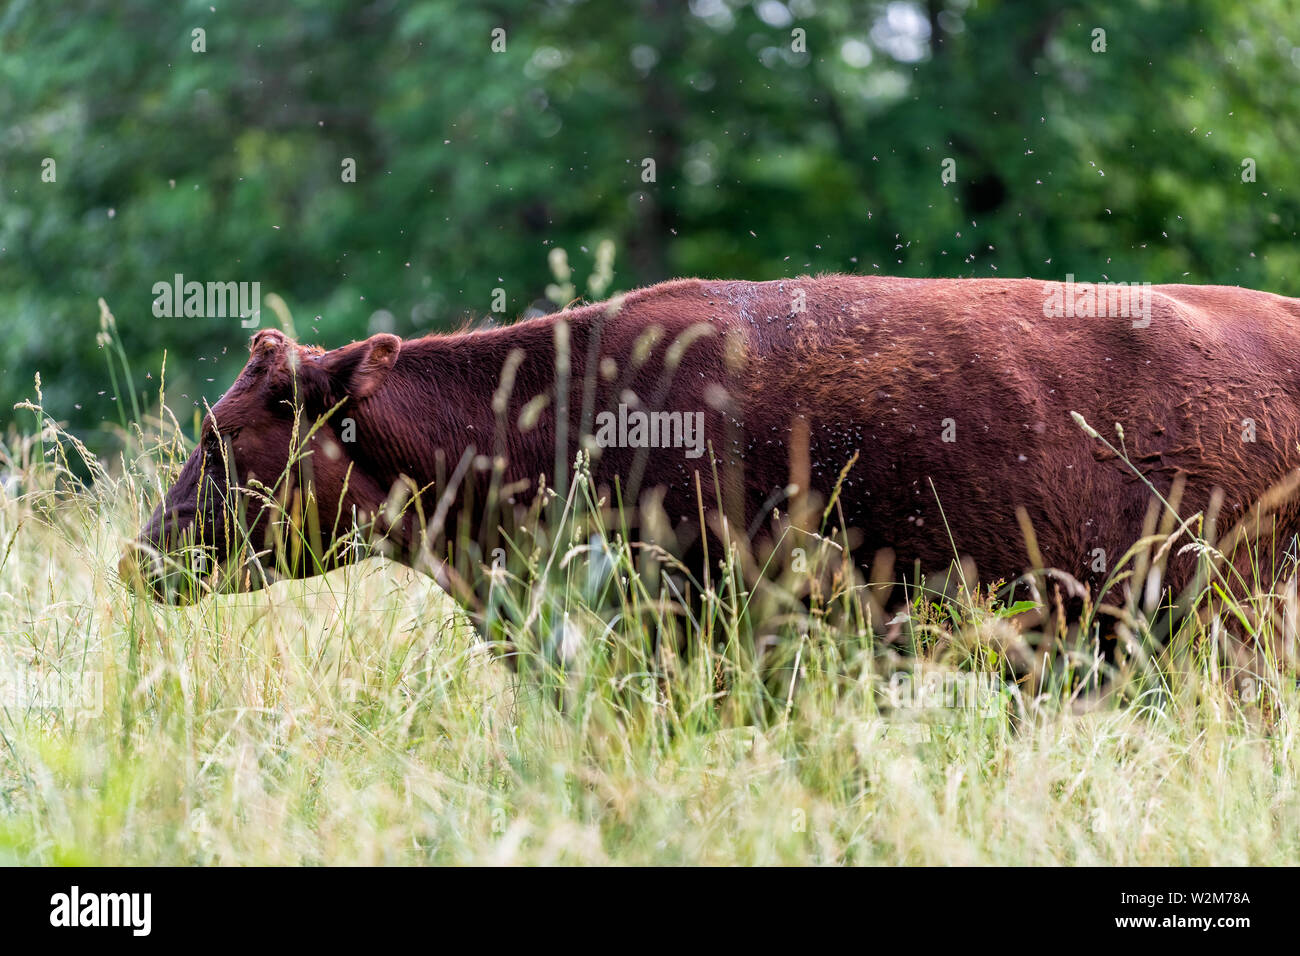 One brown cow in farm field grazing on grass and many flies around it and bokeh background Stock Photo